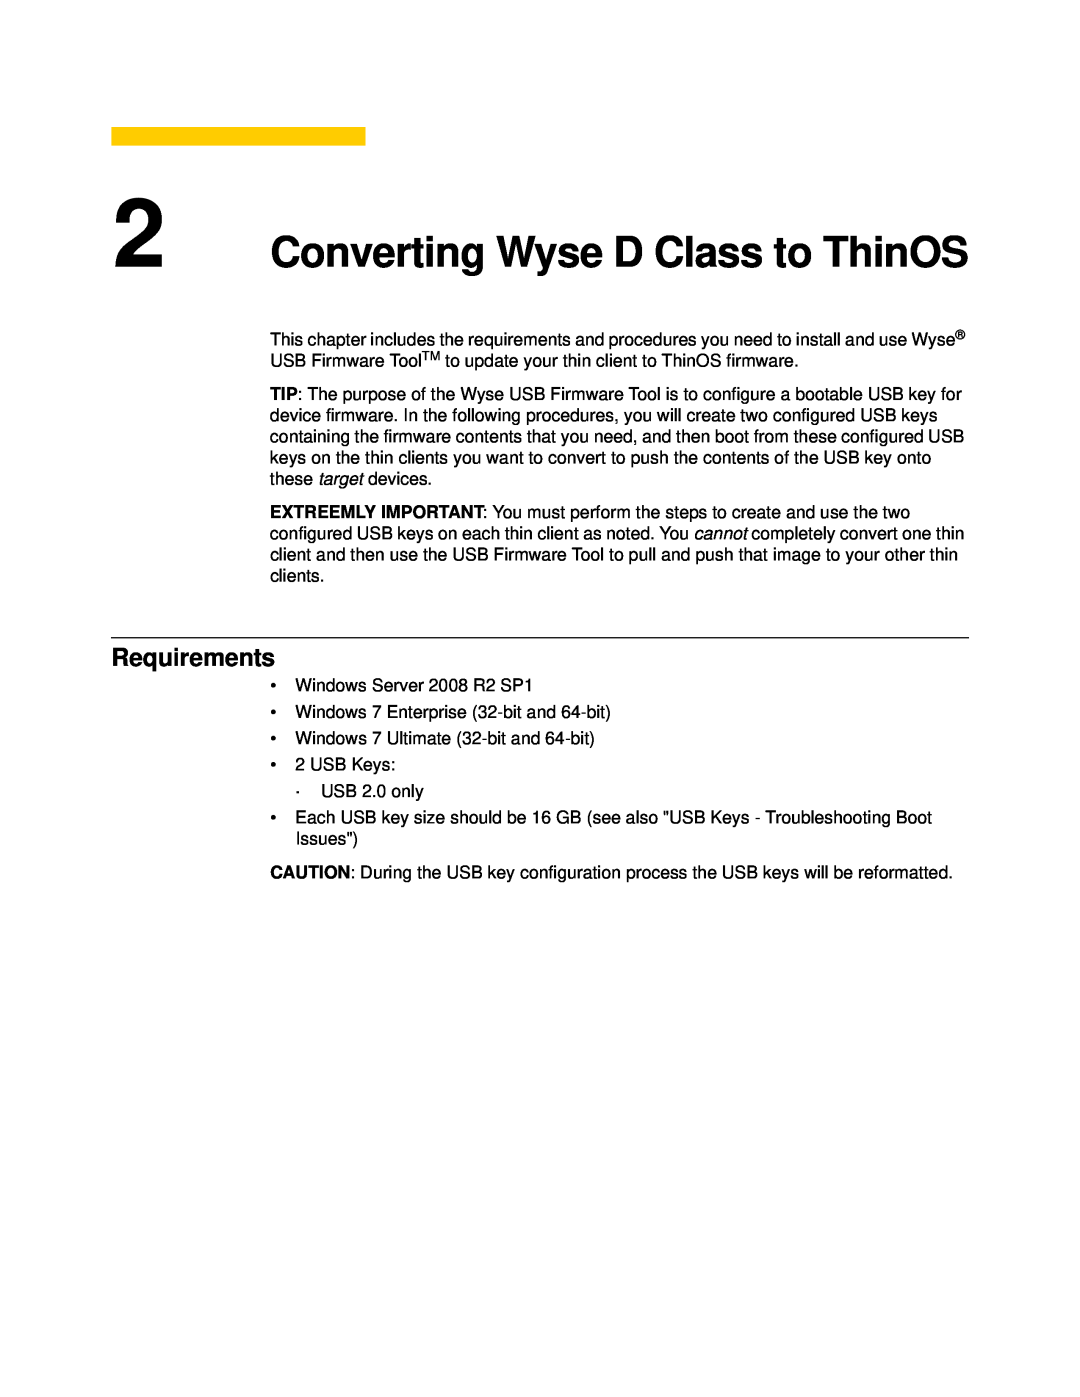 Wyse Technology wyse usb firmware tool manual Converting Wyse D Class to ThinOS, Requirements 